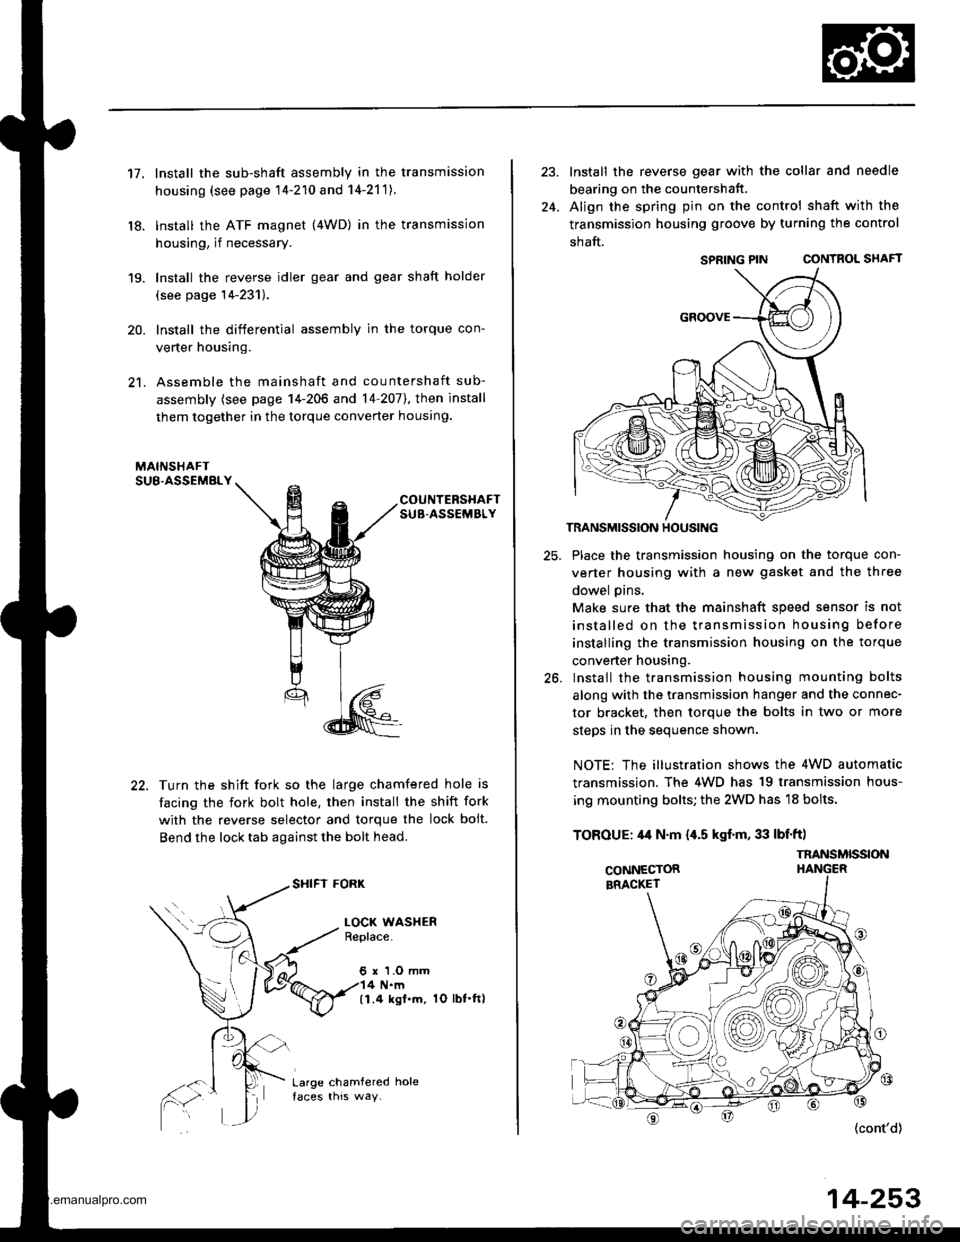 HONDA CR-V 1999 RD1-RD3 / 1.G Workshop Manual 
17.
18.
19.
20.
21.
Install the sub-shaft assembly in the transmission
housing (see page 14-210 and 14-2111.
lnstall the ATF magnet (4WD) in the transmission
housing, if necessary.
Install the rever